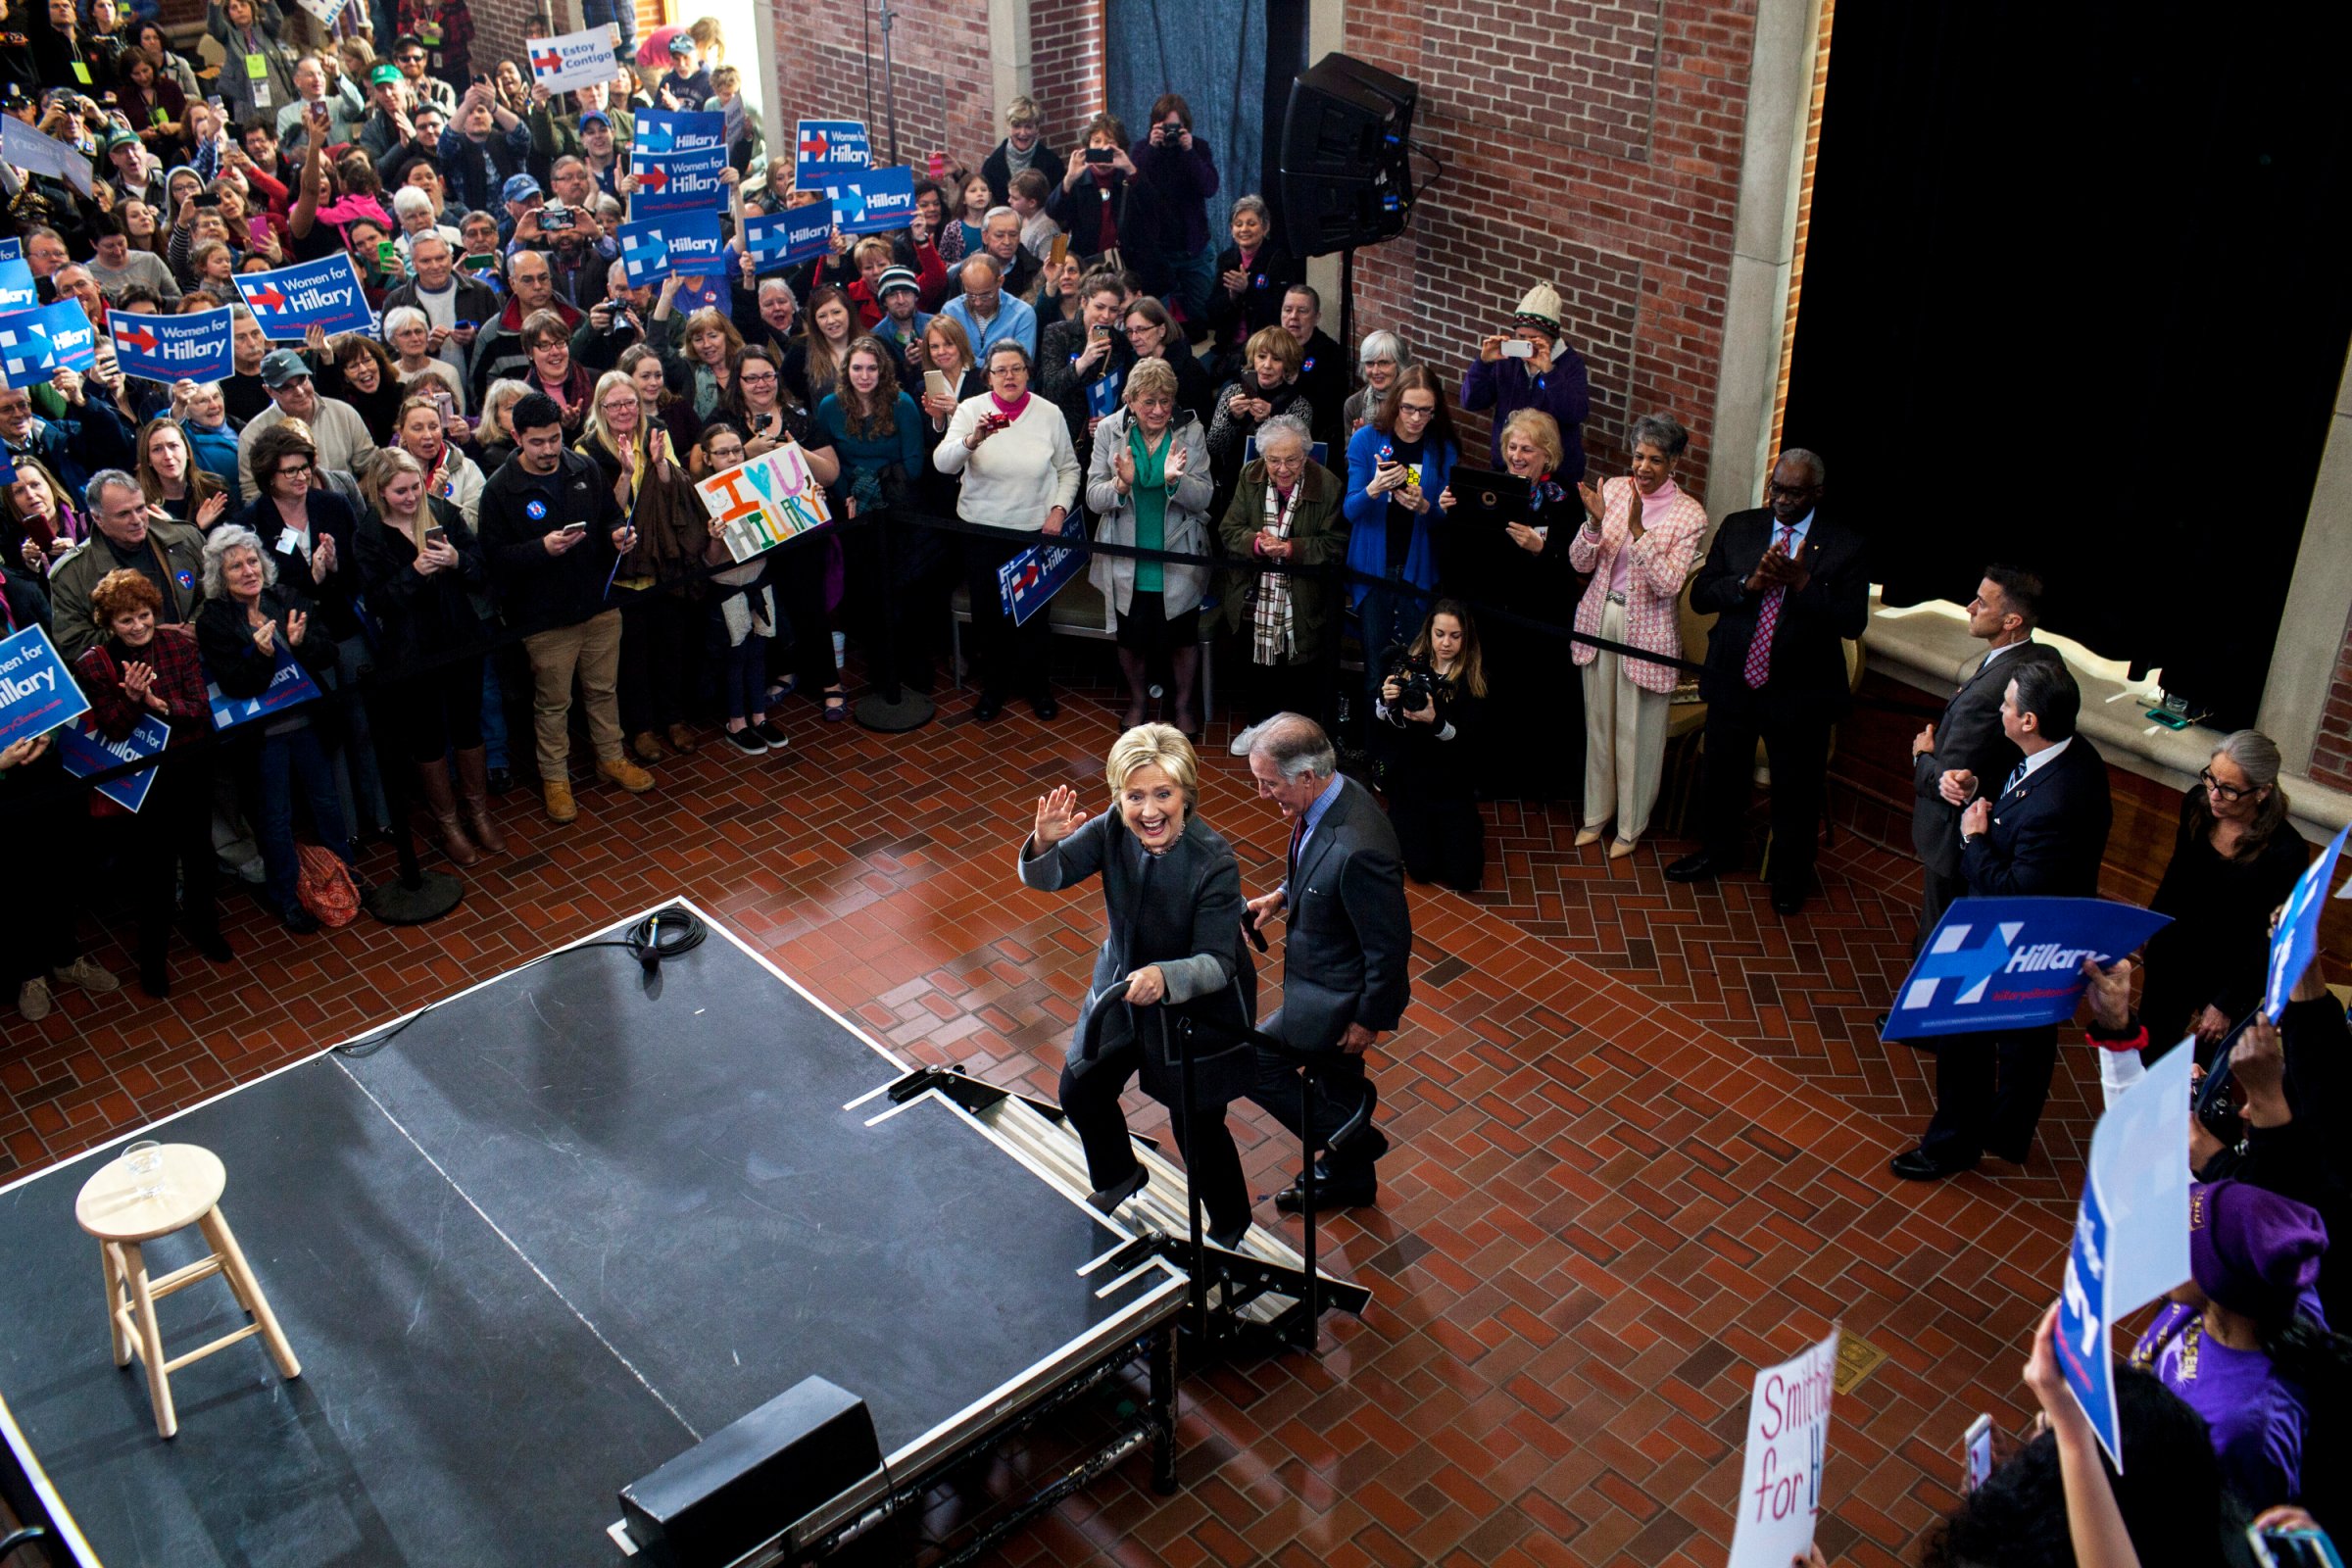 Democratic presidential candidate, former Secretary of State Hillary Clinton campaigns on Monday, Feb. 29, 2016 at the Lyman and Merrie Wood Museum of Springfield History in Springfield, Mass.